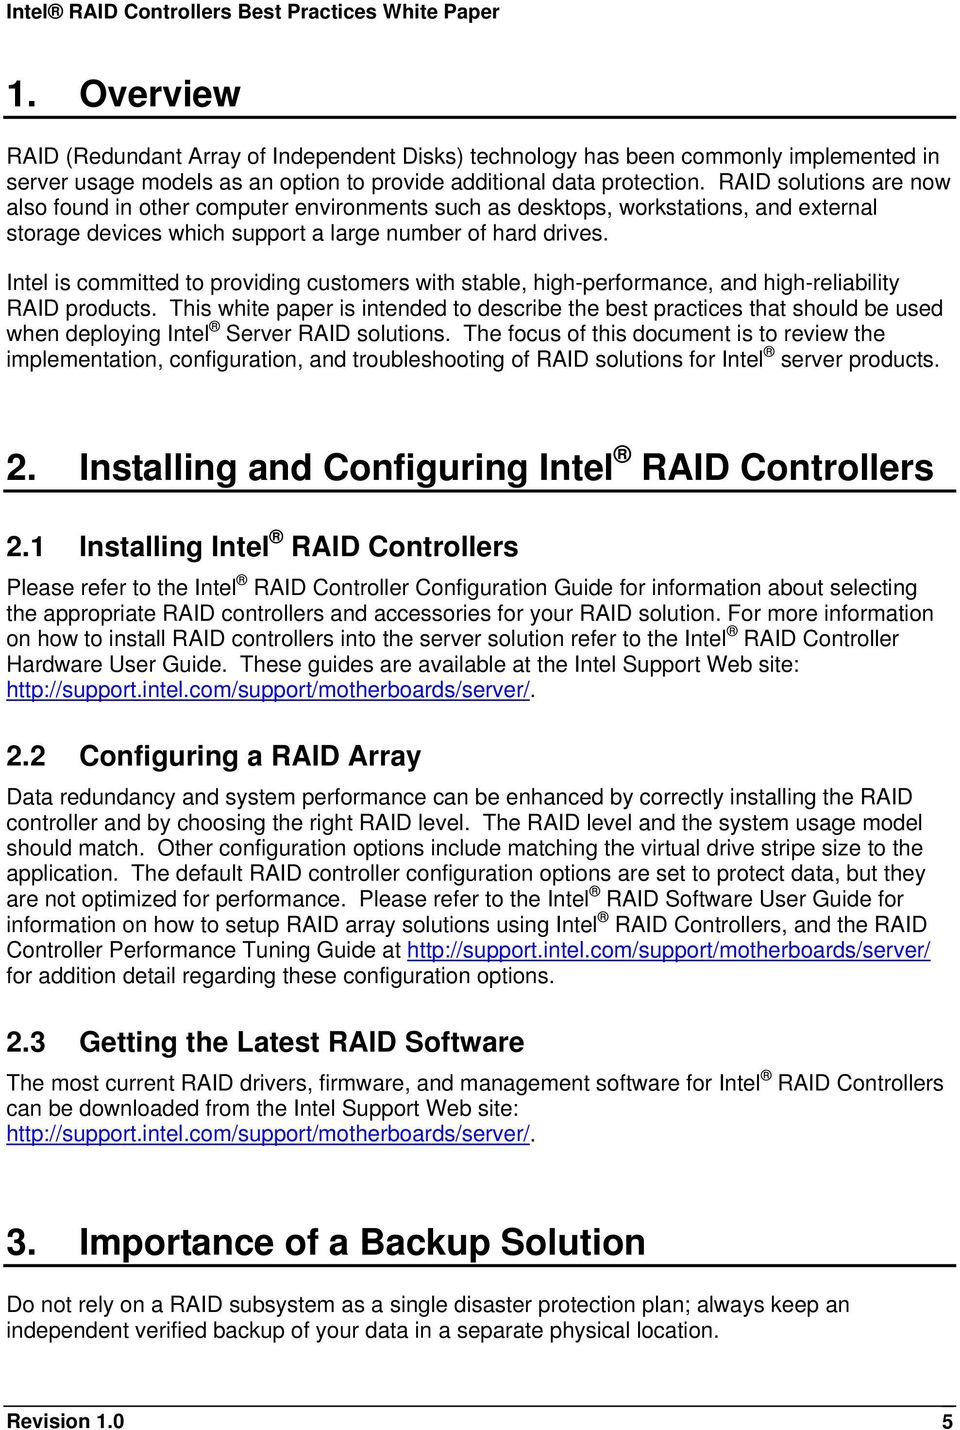 Intel is committed to providing customers with stable, high-performance, and high-reliability RAID products.